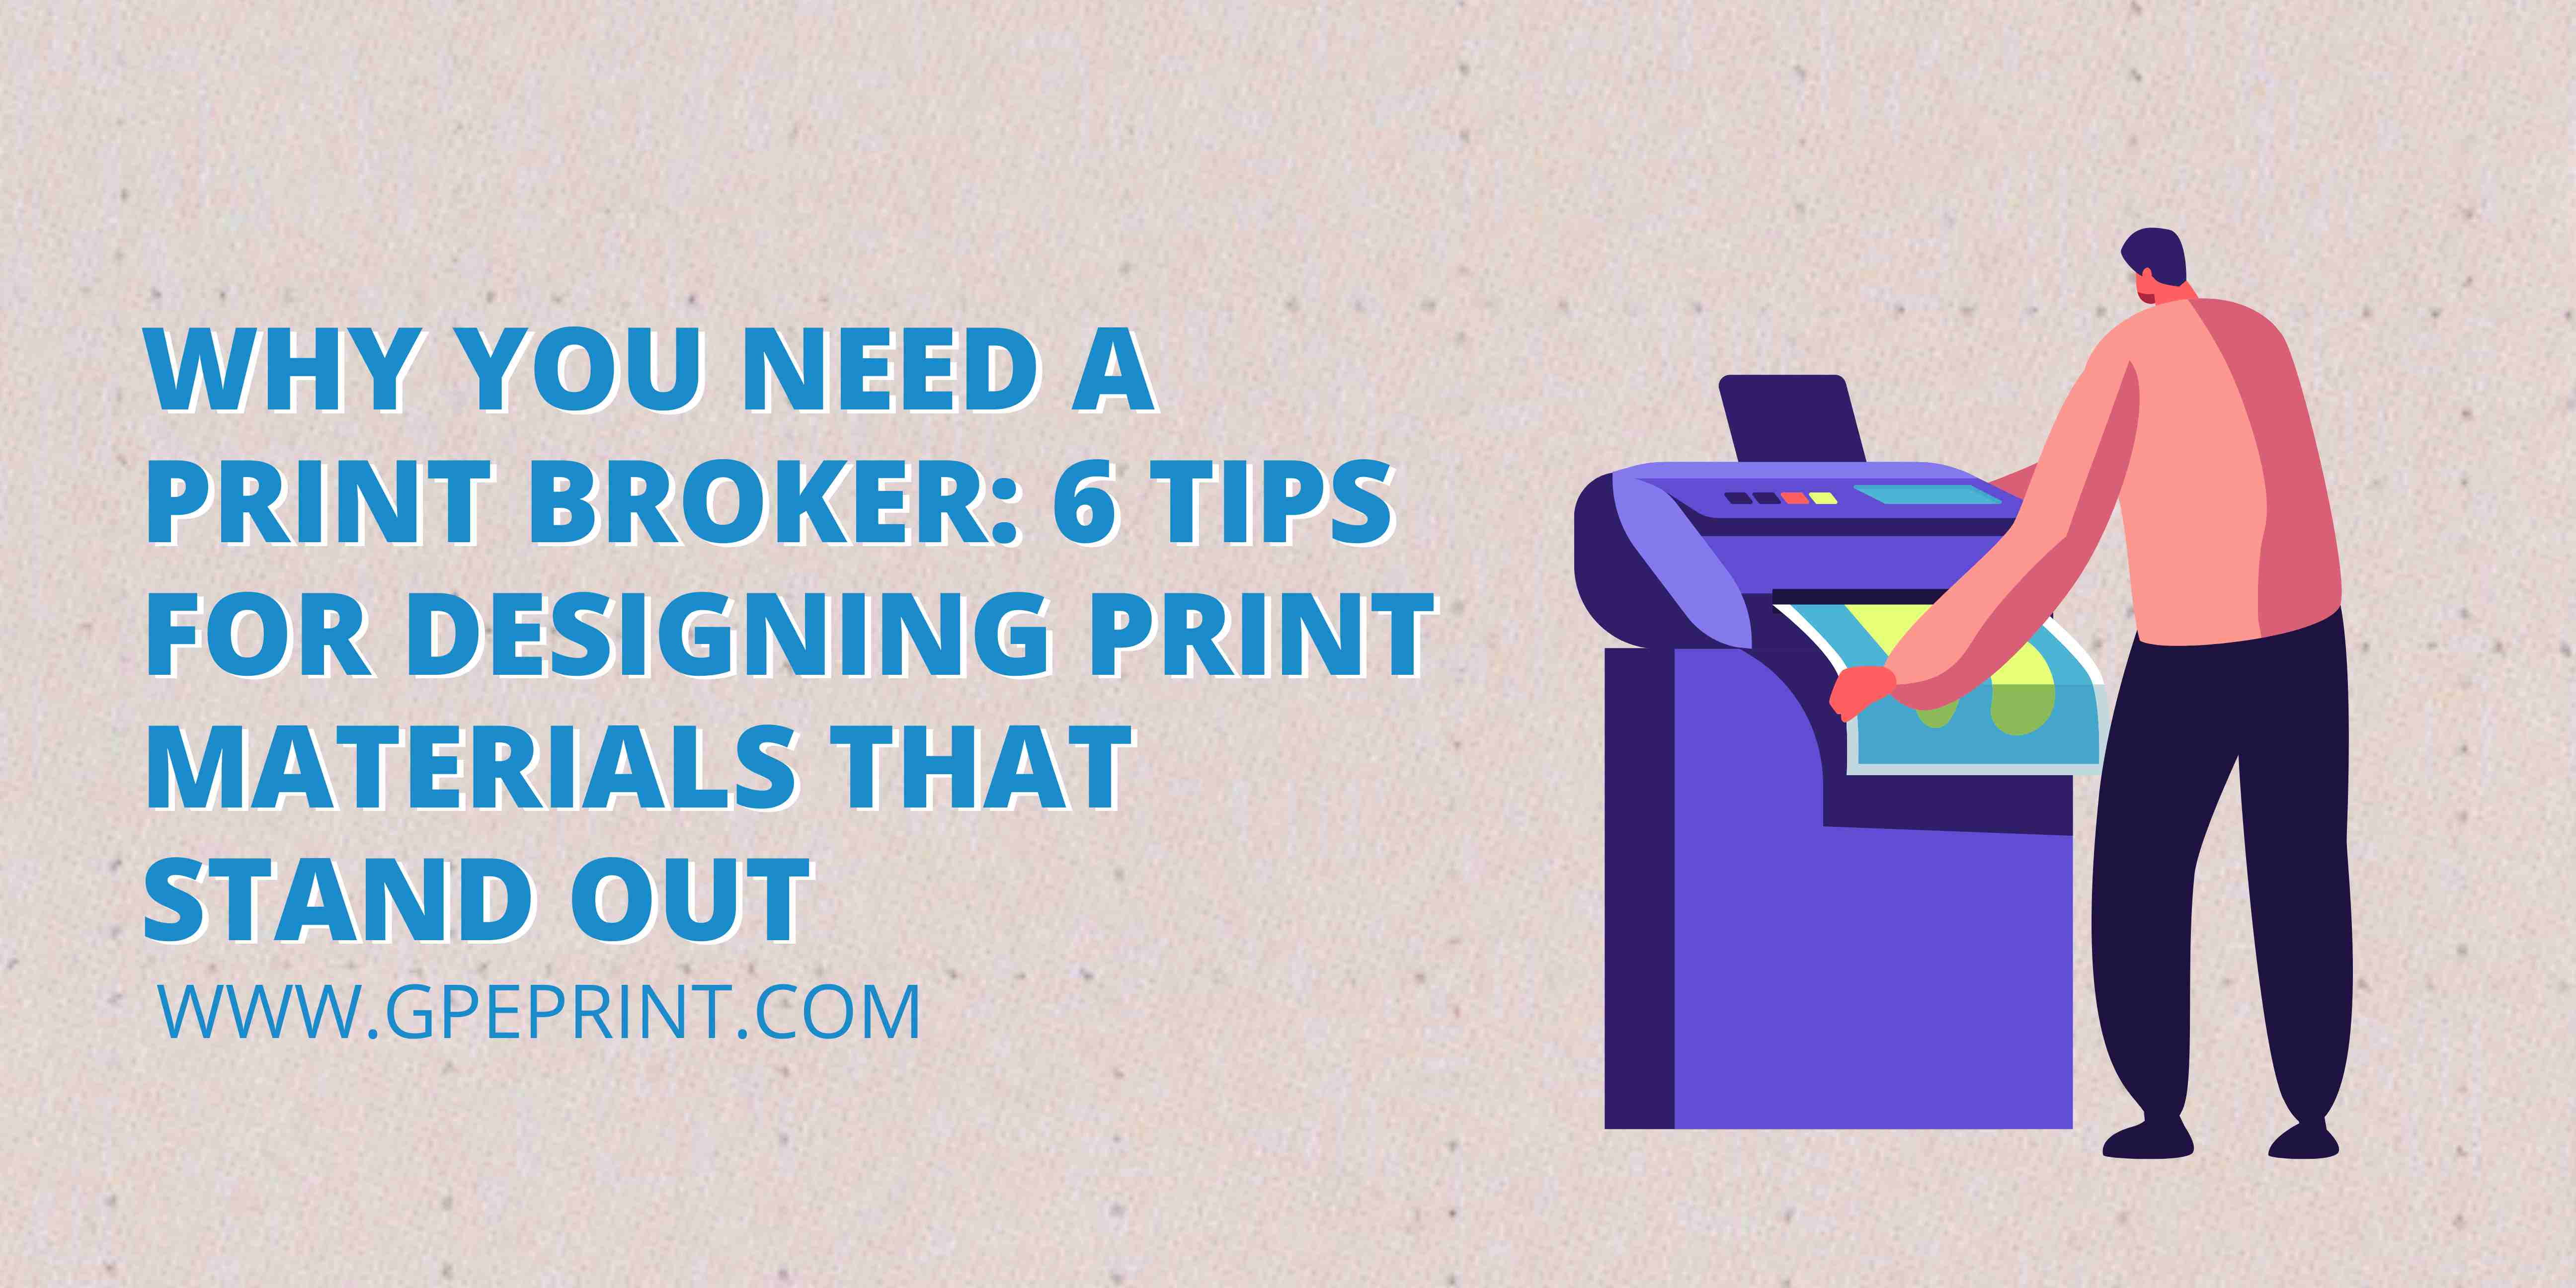 Why You Need a Print Broker: 6 Tips for Designing Print Materials That Stand Out